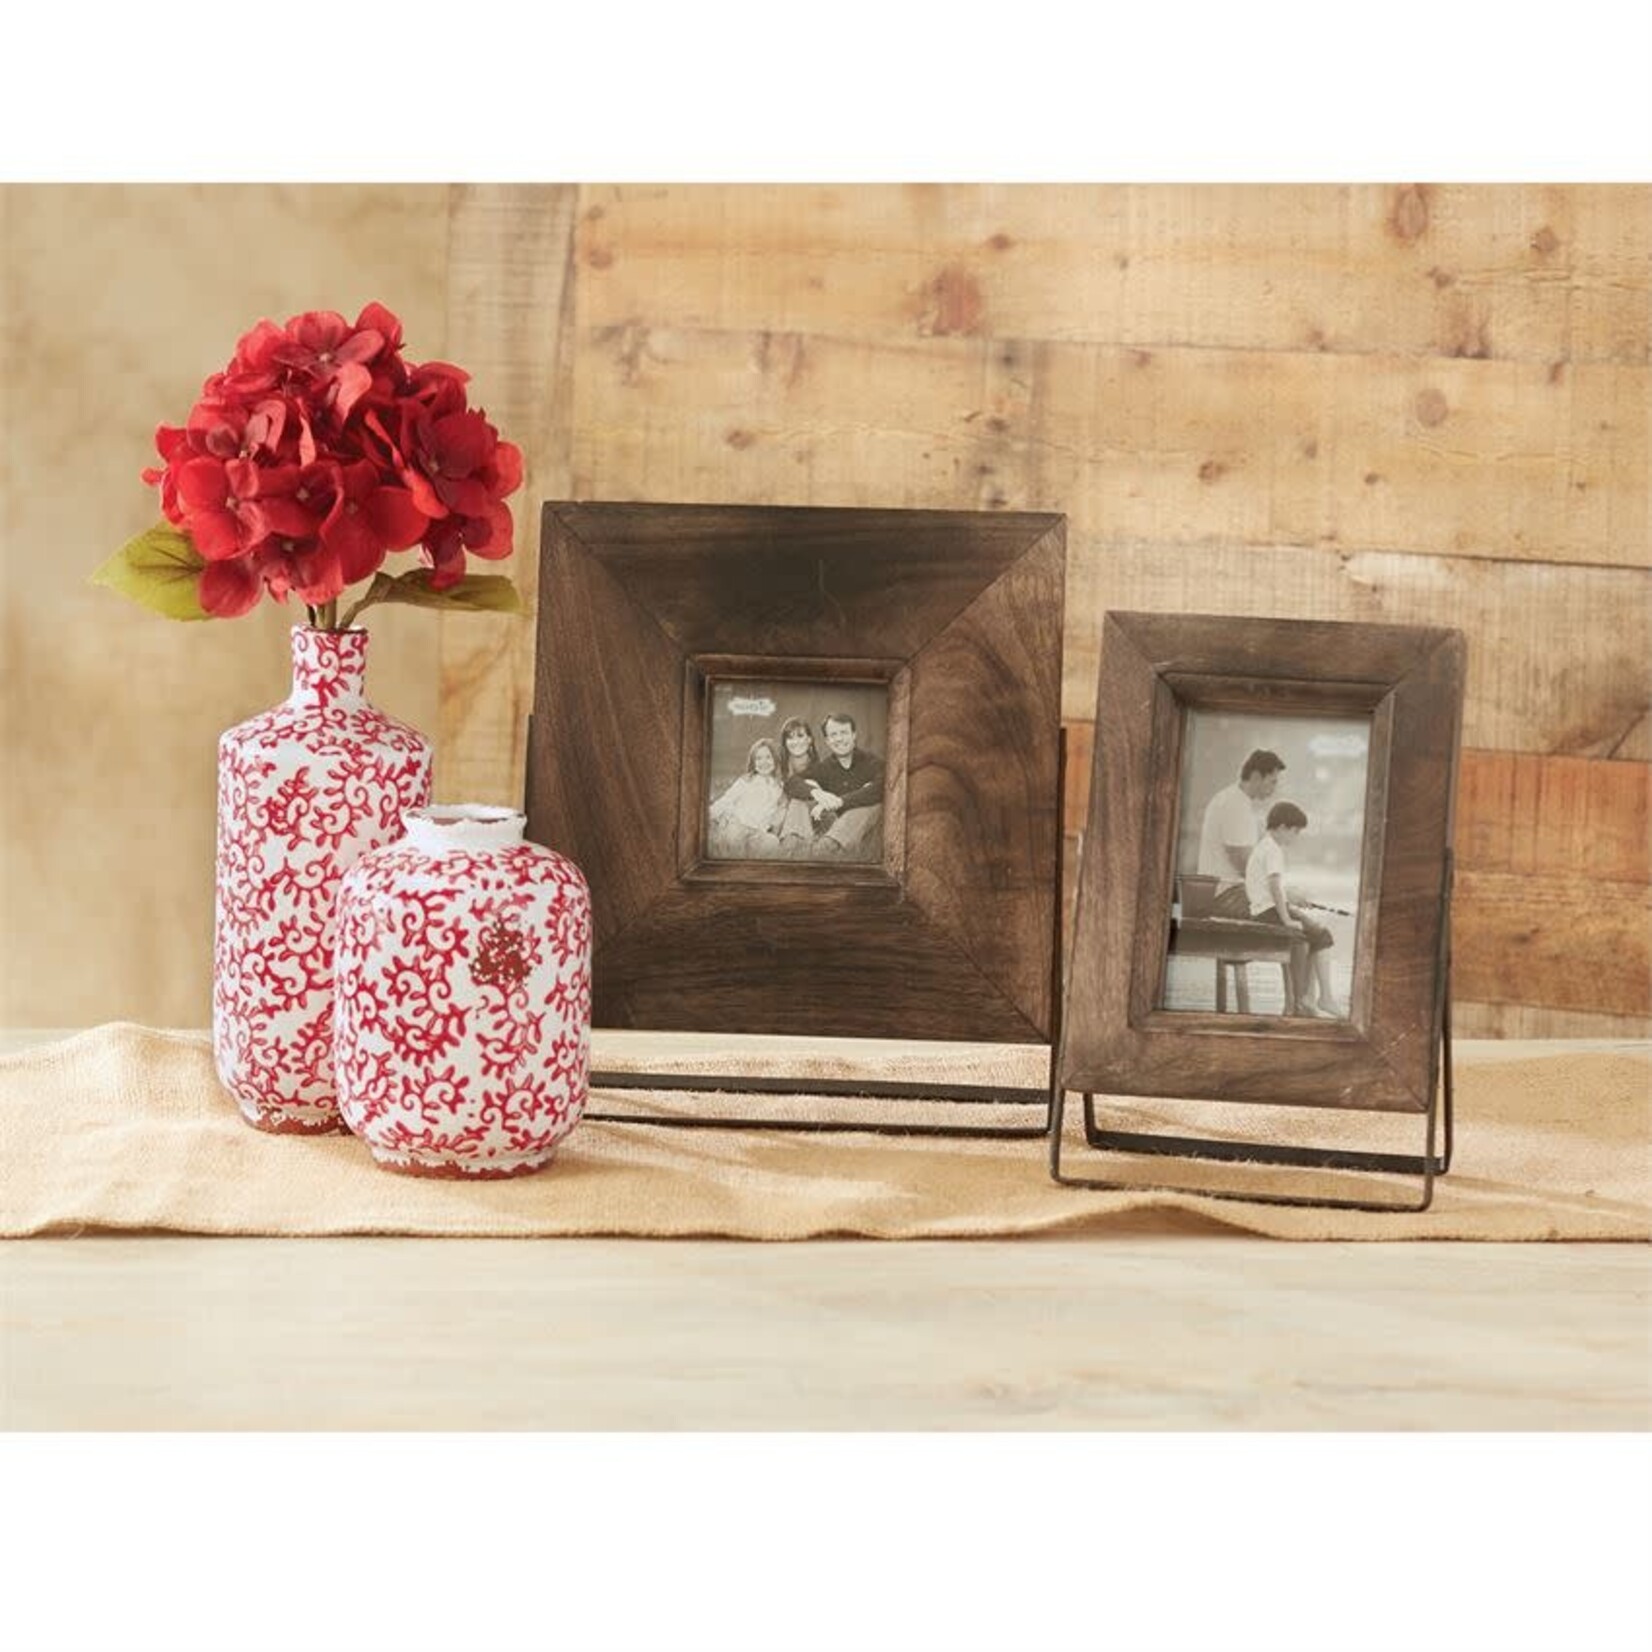 Mud Pie 4x6 Wood Frame on Stand